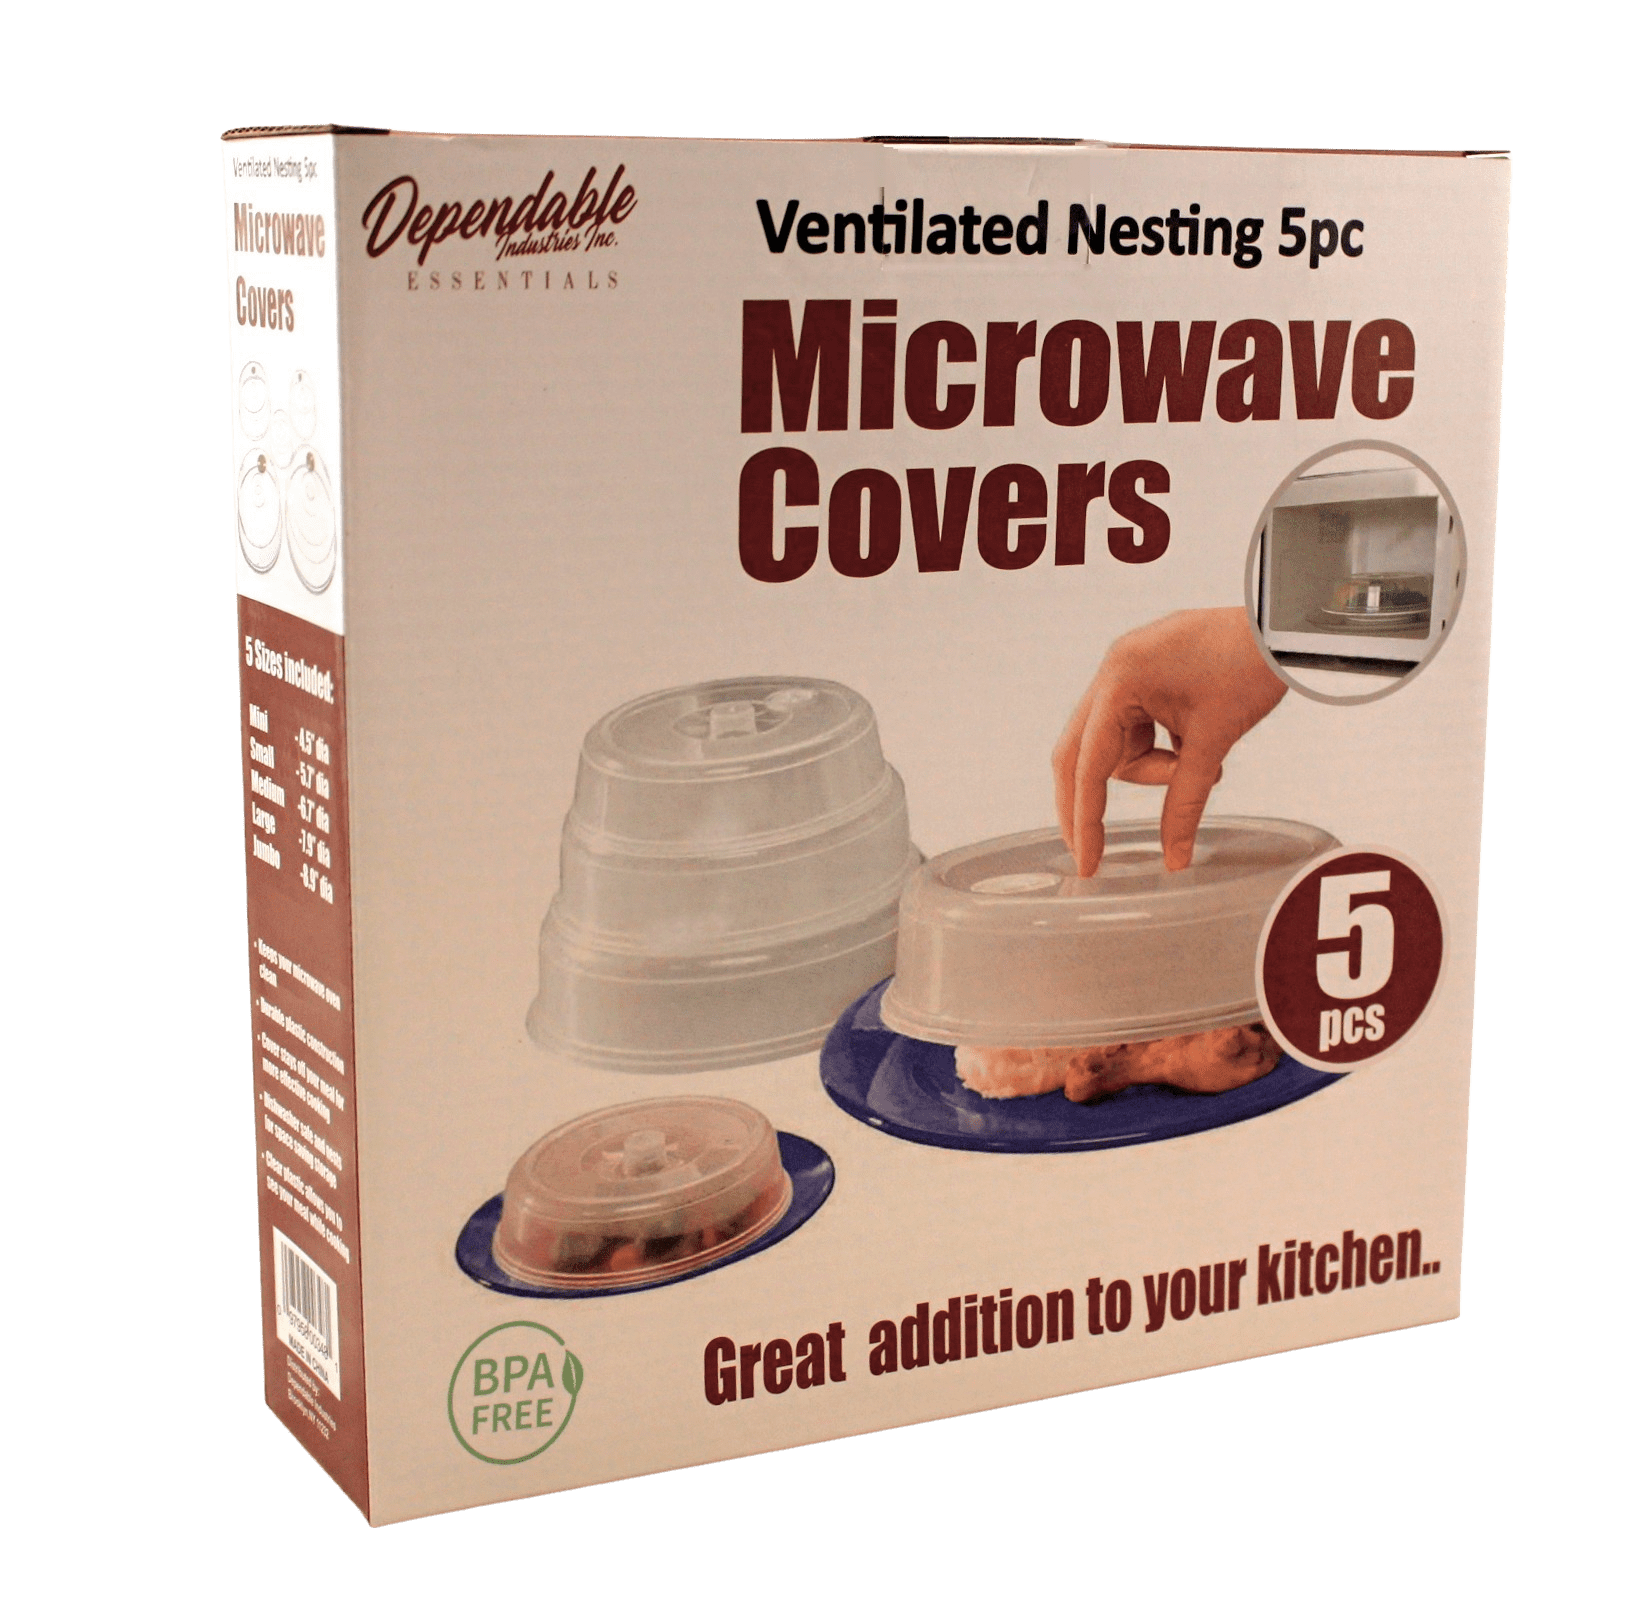 Set of 5 Microwave Plate Covers with Adjustable Steam Vents Microwave Splatter Covers - Mixed Sizes for Large & Small Food Plates Bowls